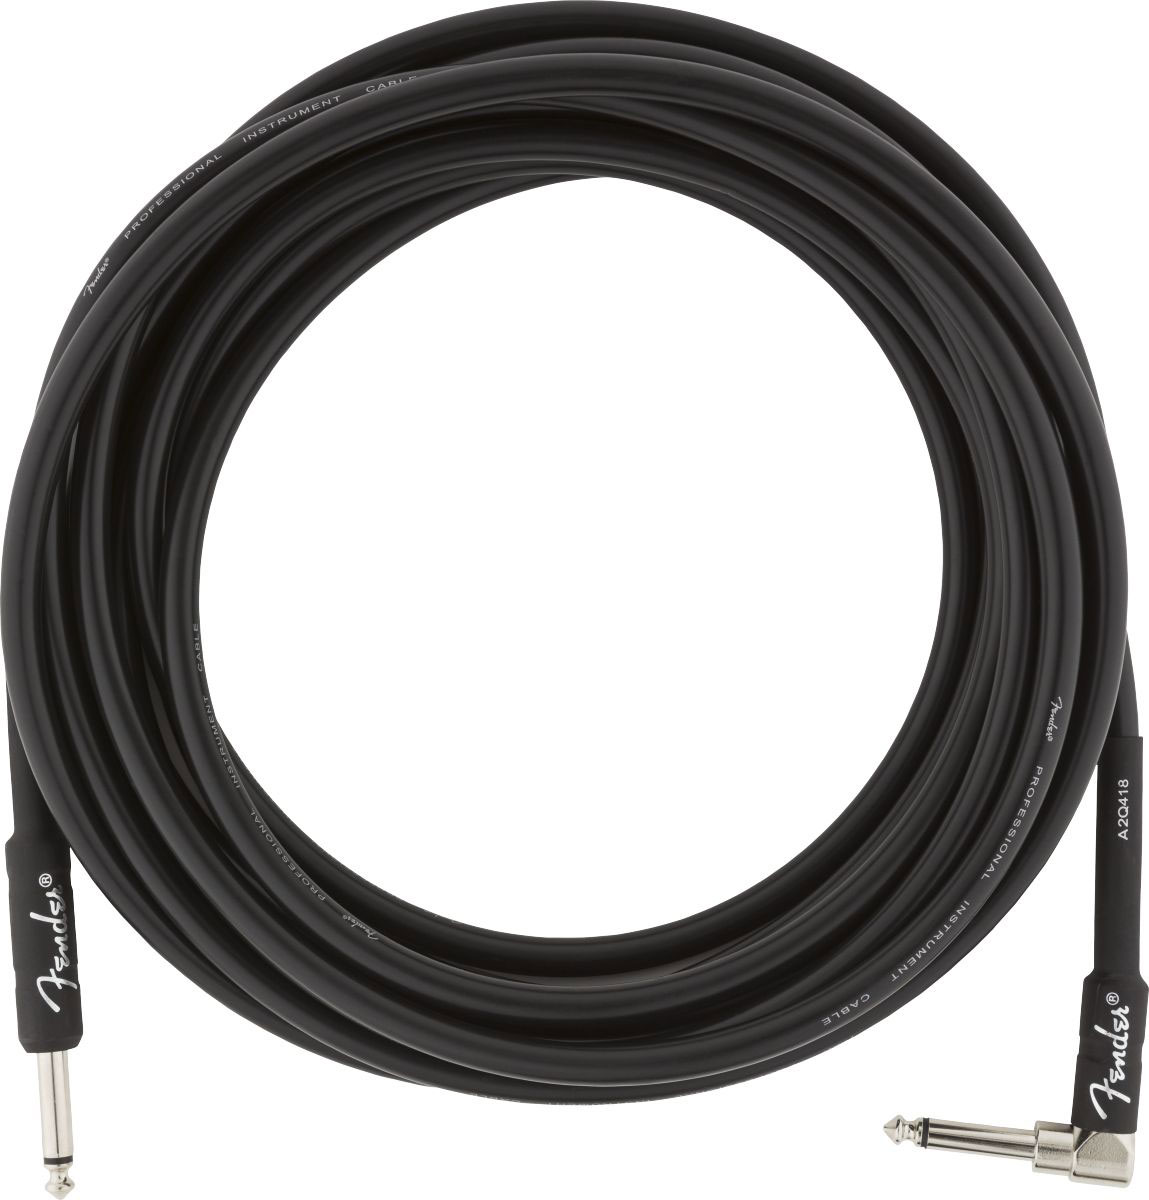 PROFESSIONAL INSTRUMENT CABLE, STRAIGHT/ANGLE, 18.6', BLACK